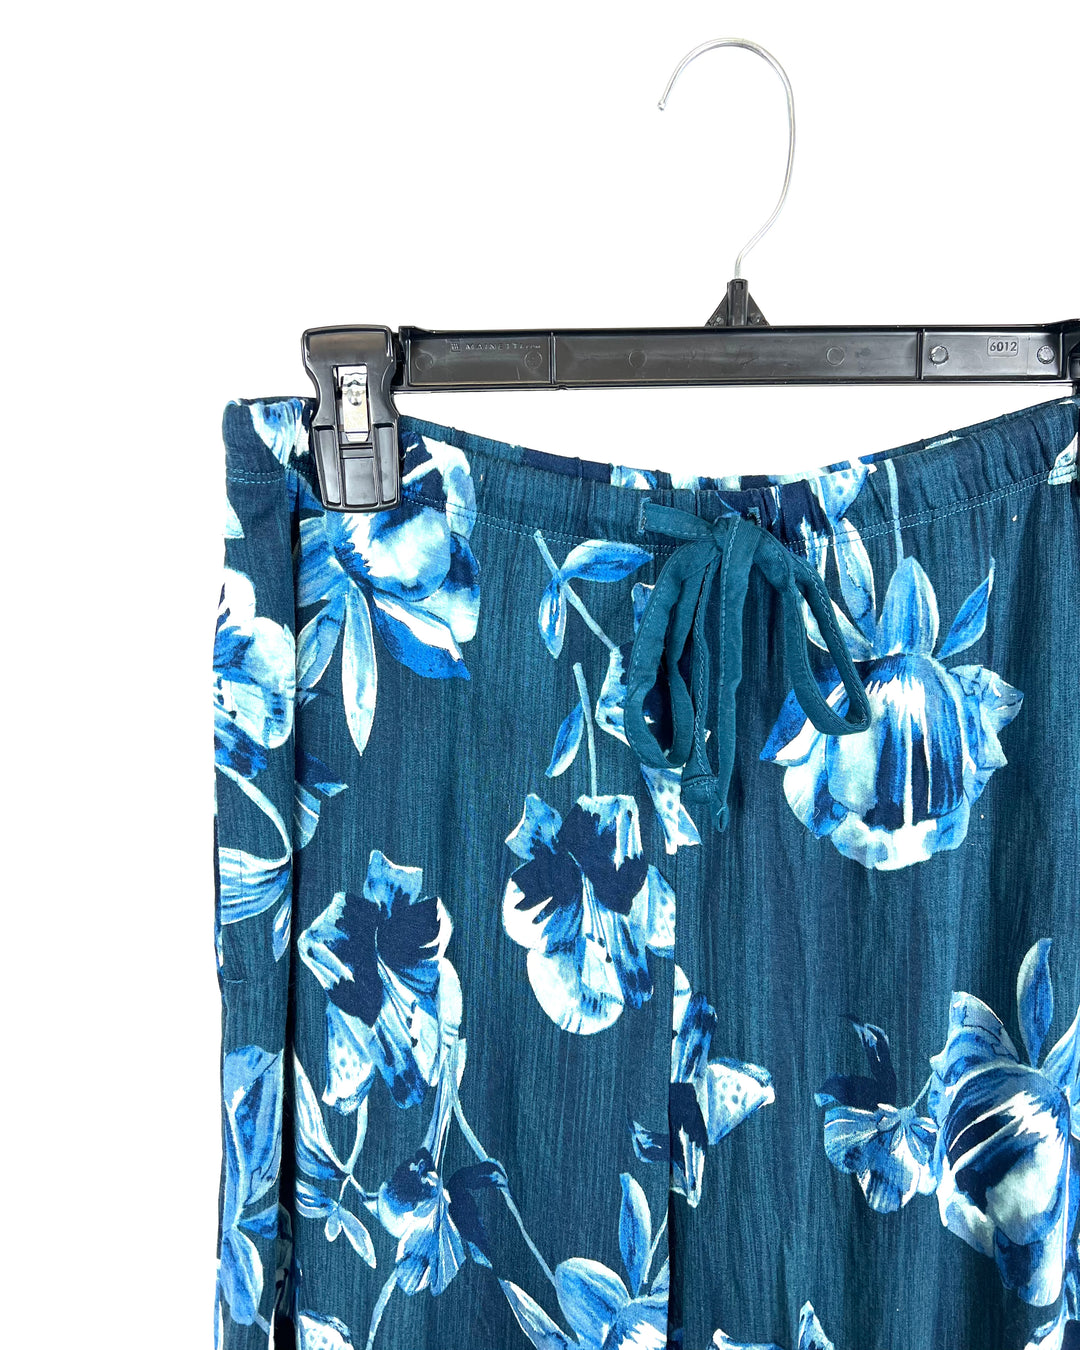 Pacific Blue Sleepwear Bottoms with Floral Print - Size 4-6